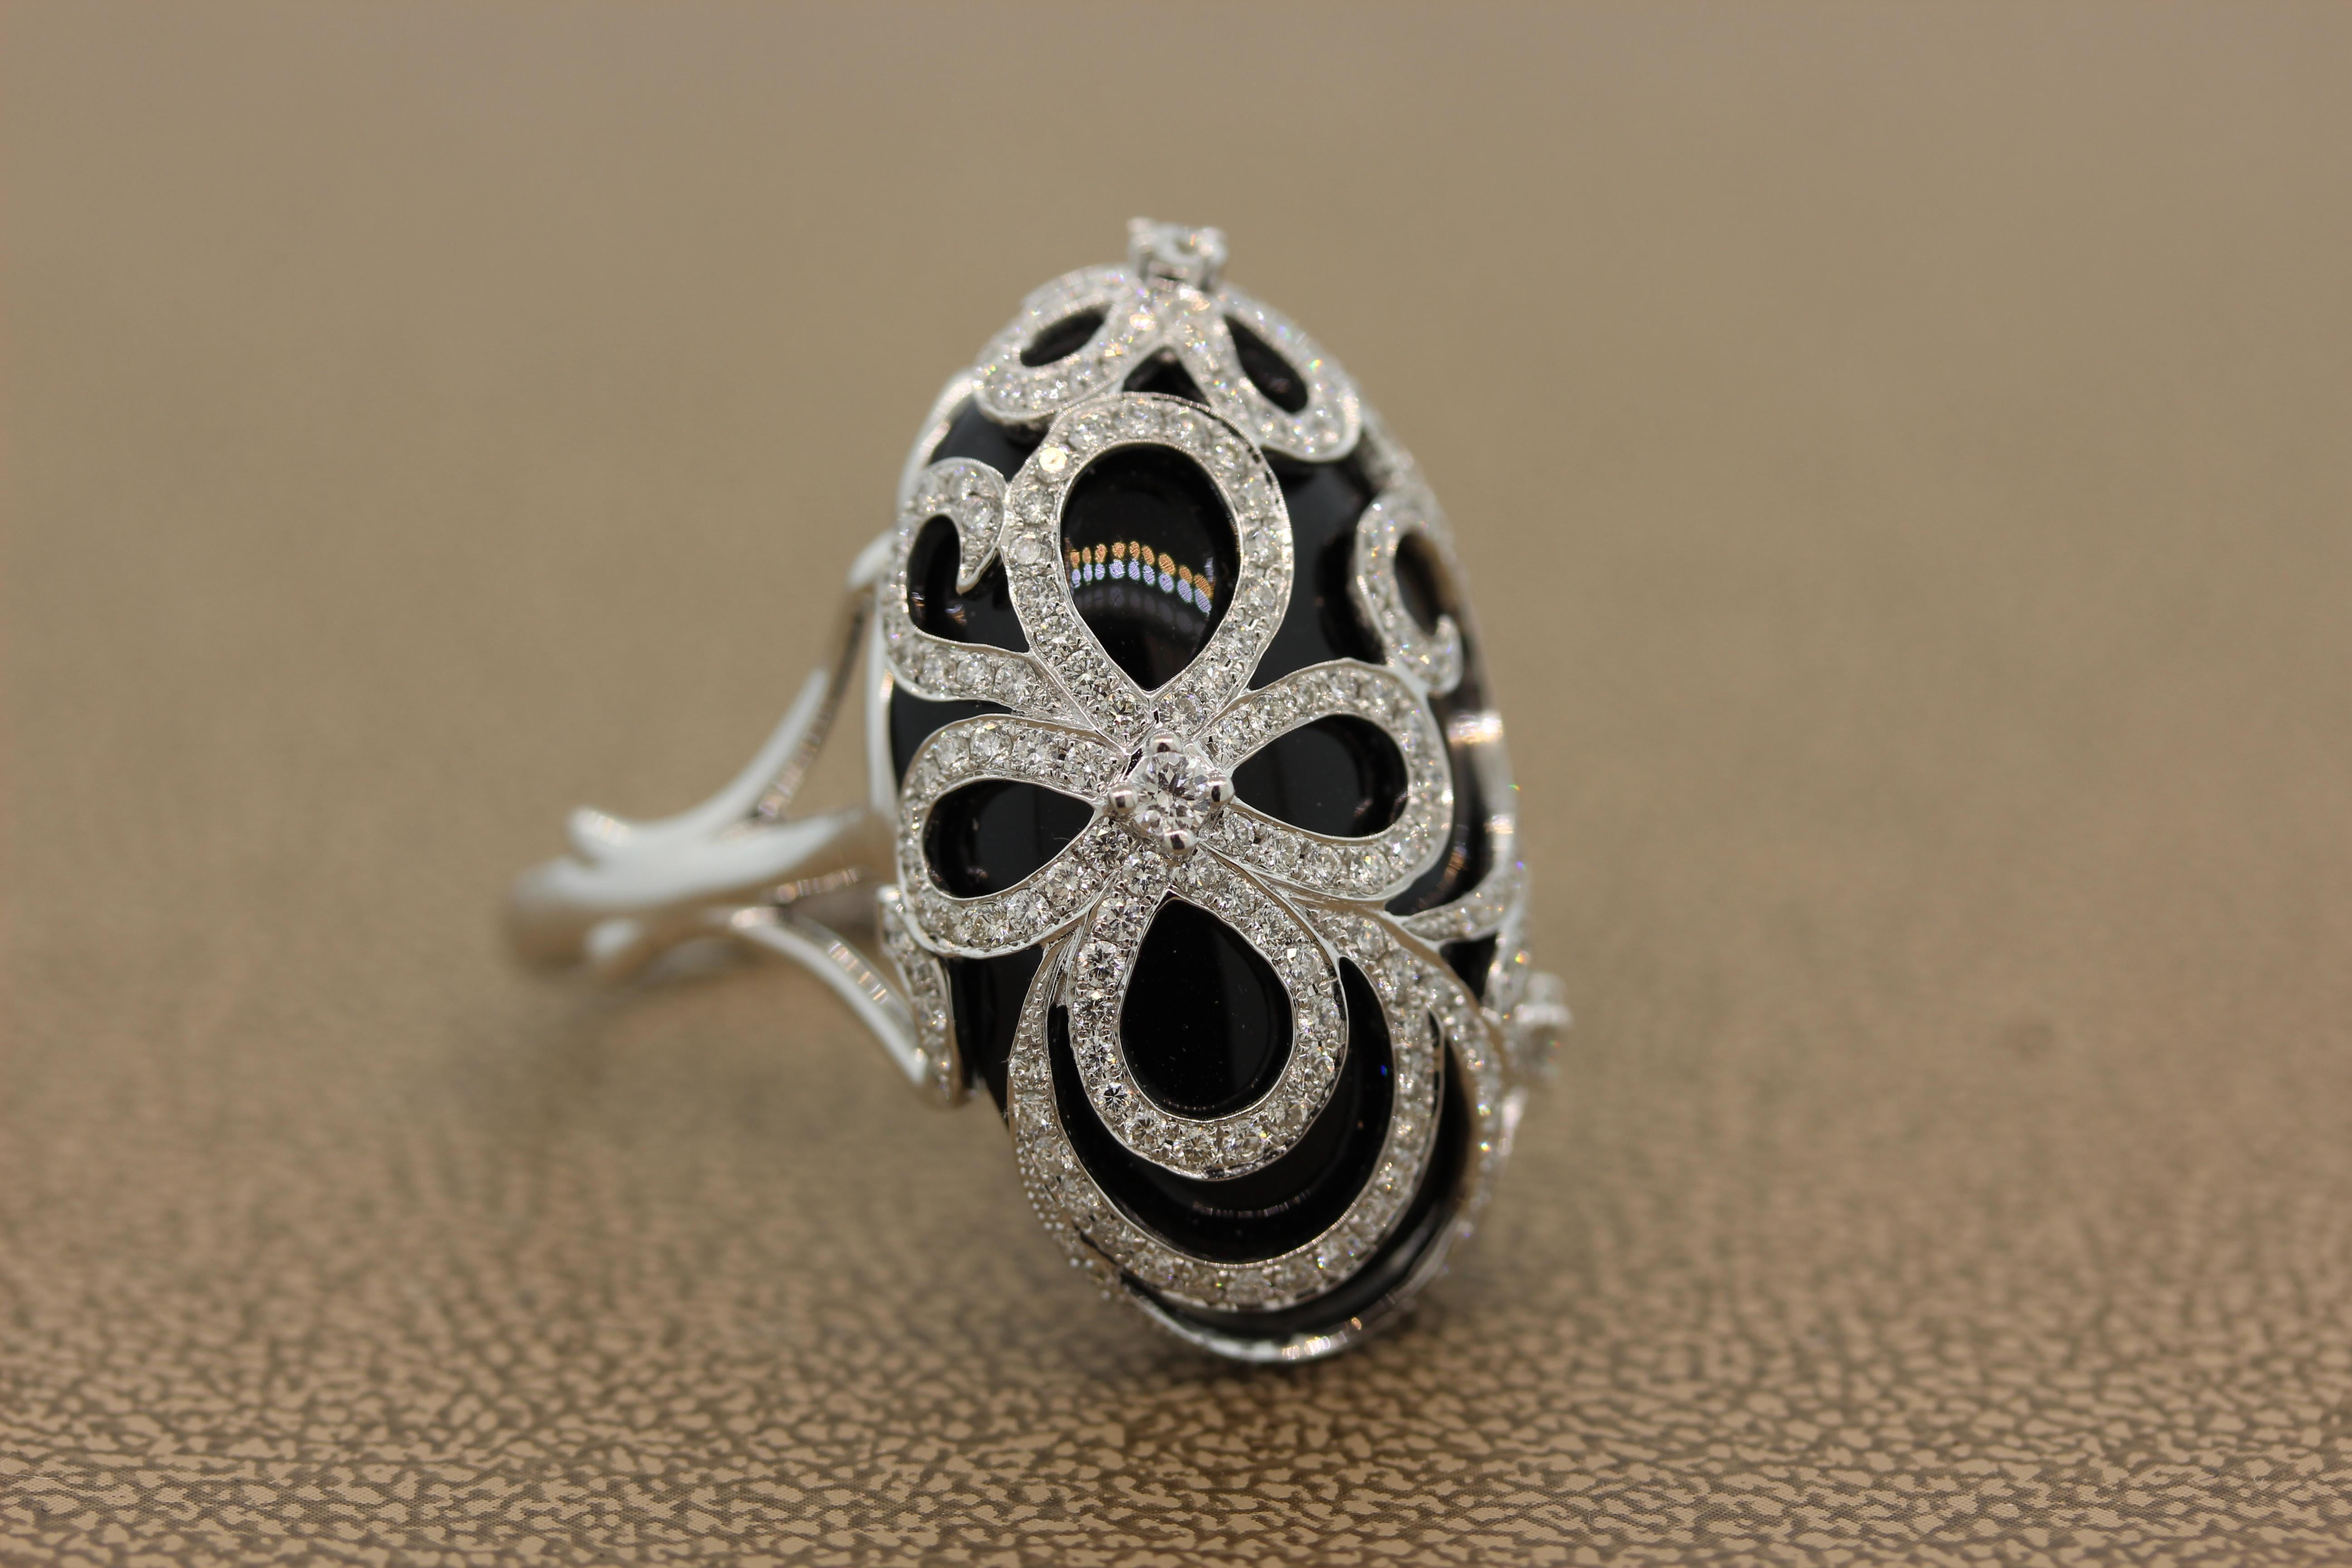 A bold and elegant cocktail ring featuring an oval shaped black onyx. The smooth glistening onyx is topped with a filigree lace of round cut diamonds. The 1.46 carats of VS quality diamonds are set in an 18K white gold setting creating an armature